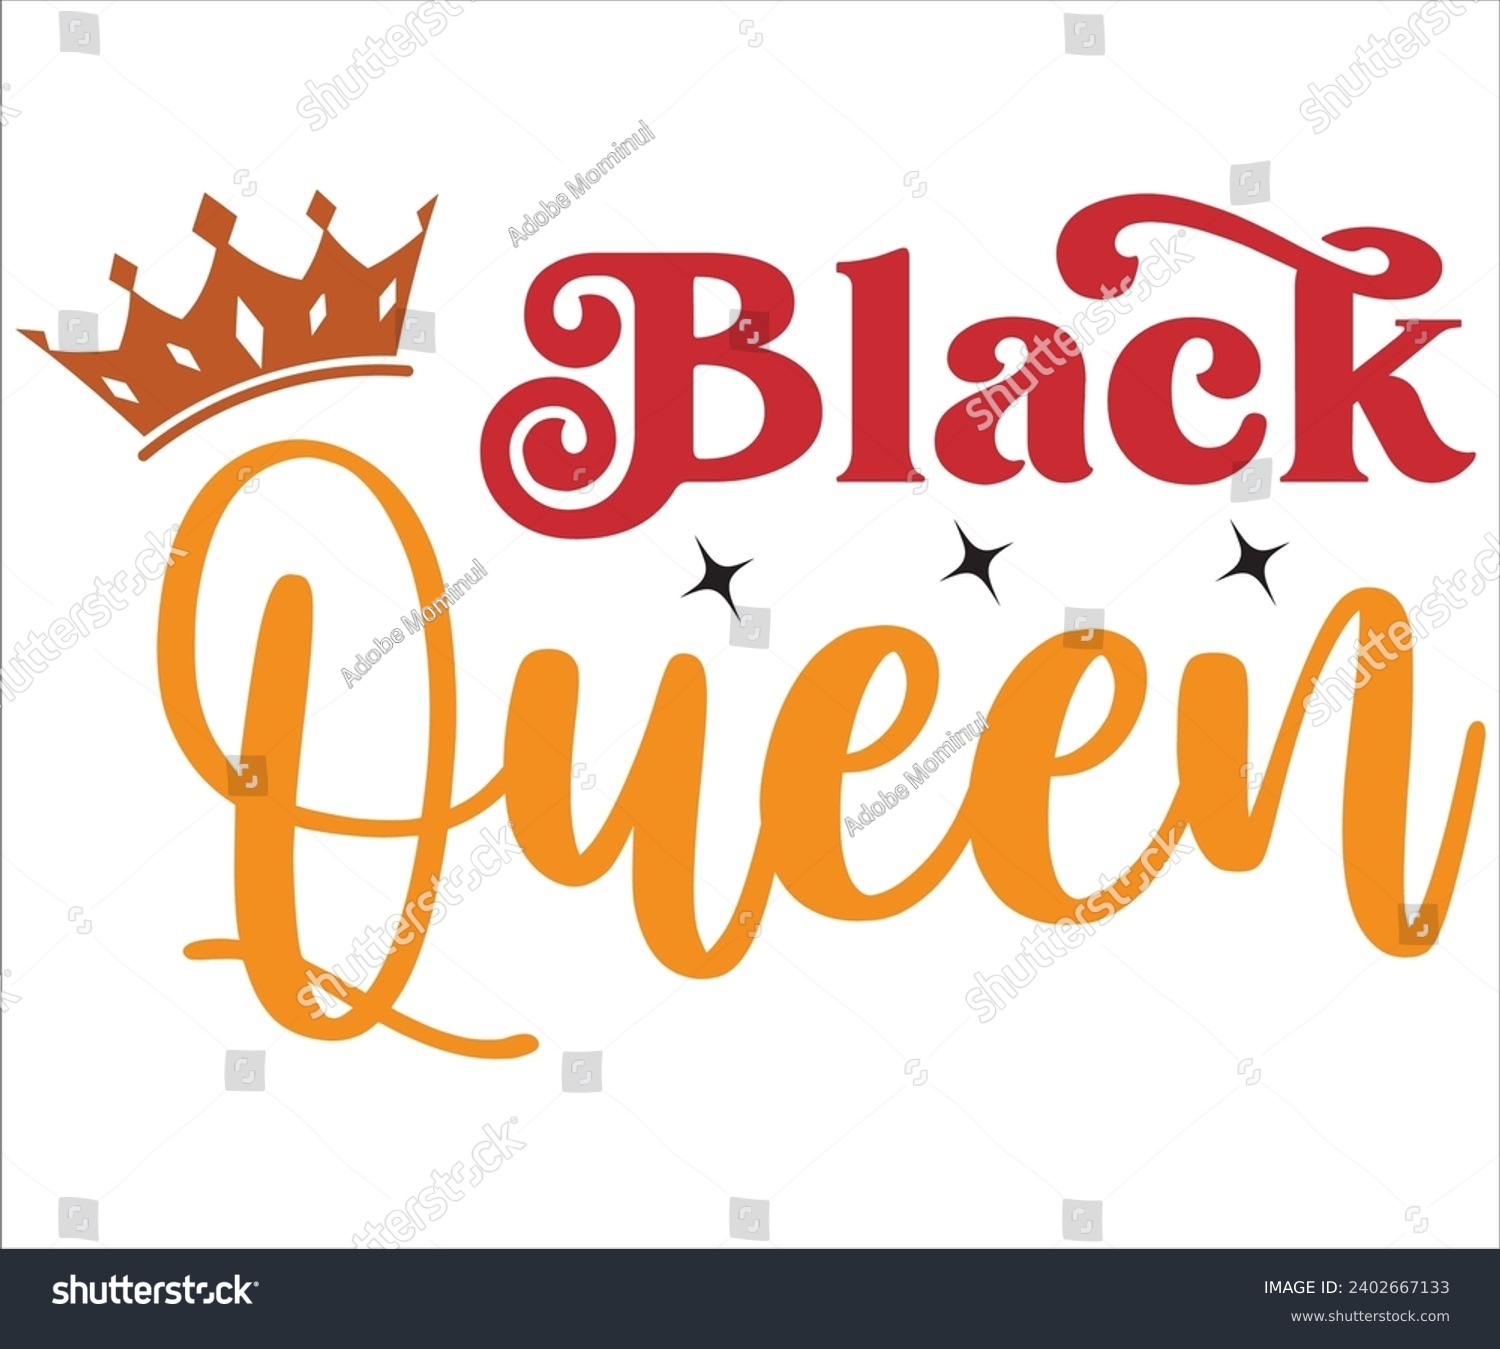 SVG of Black Queen Svg,Black History Month Svg,Retro,Juneteenth Svg,Black History Quotes,Black People Afro American T shirt,BLM Svg,Black Men Woman,In February in United States and Canada svg